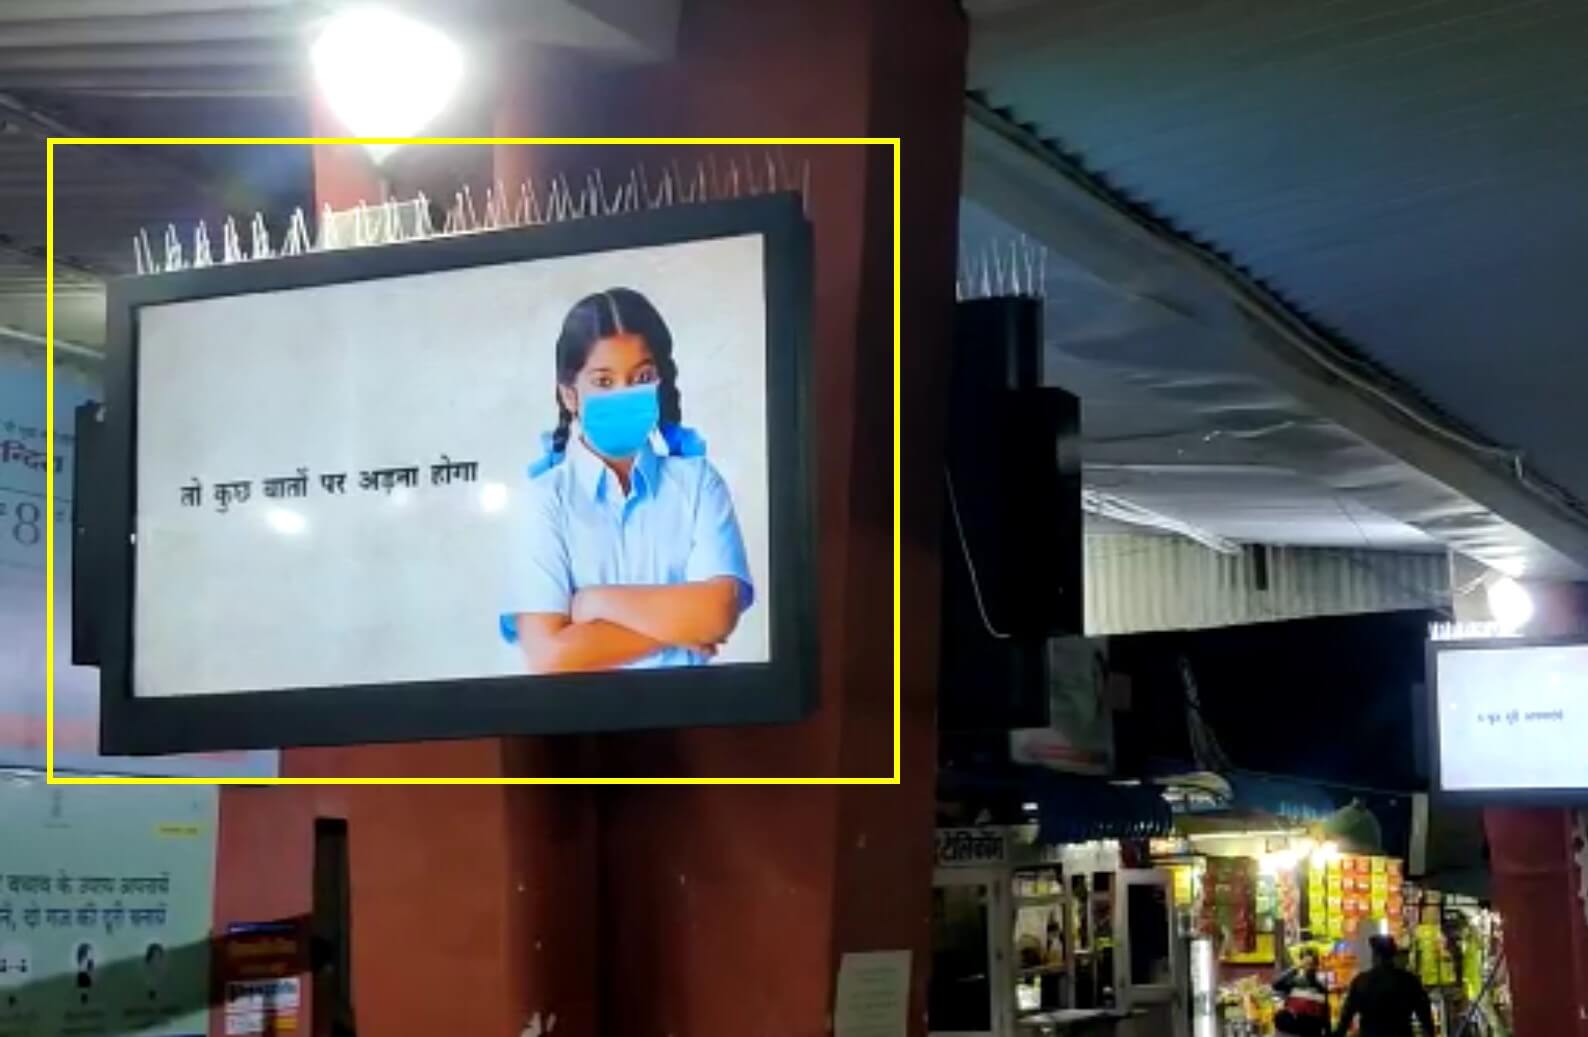 LED Screen Advertising at advertising in Ajmer bus stand, outdoor advertising in Ajmer, digital led screen advertising in Ajmer, advertising agency in Ajmer Bus Stand, Rajasthan